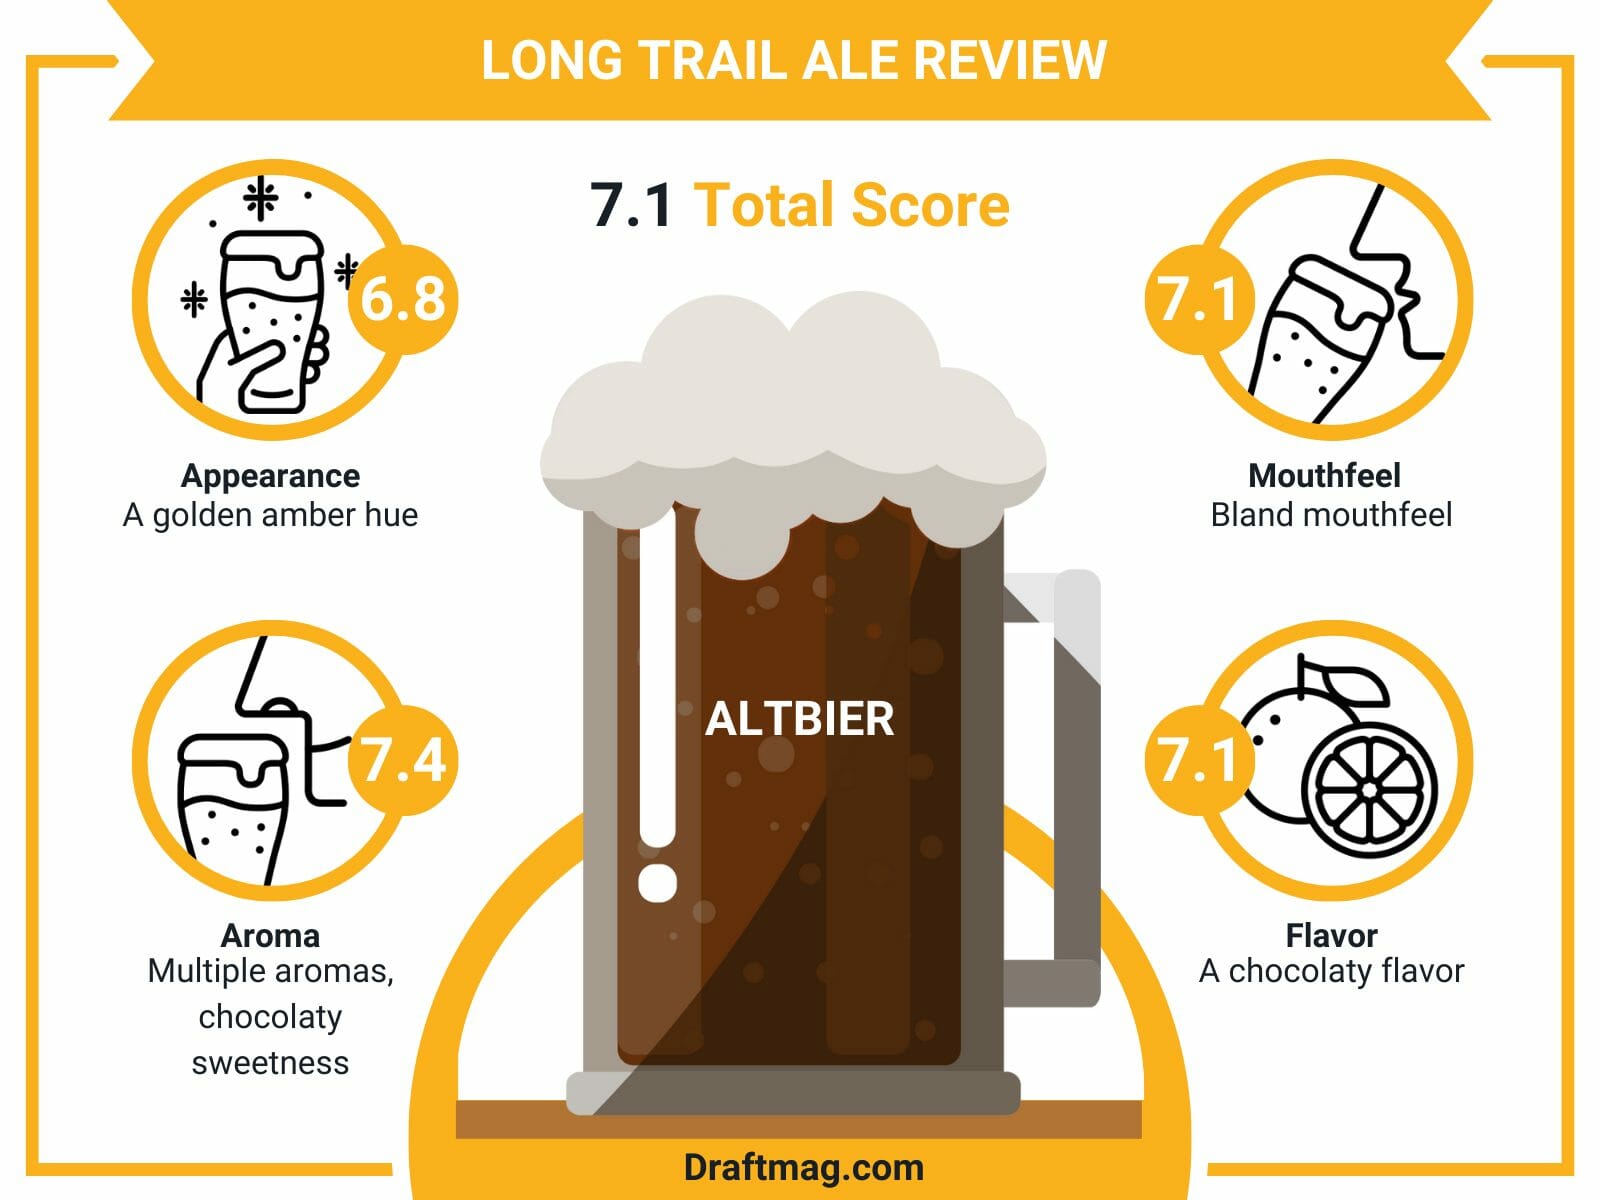 Long trail ale review infographic